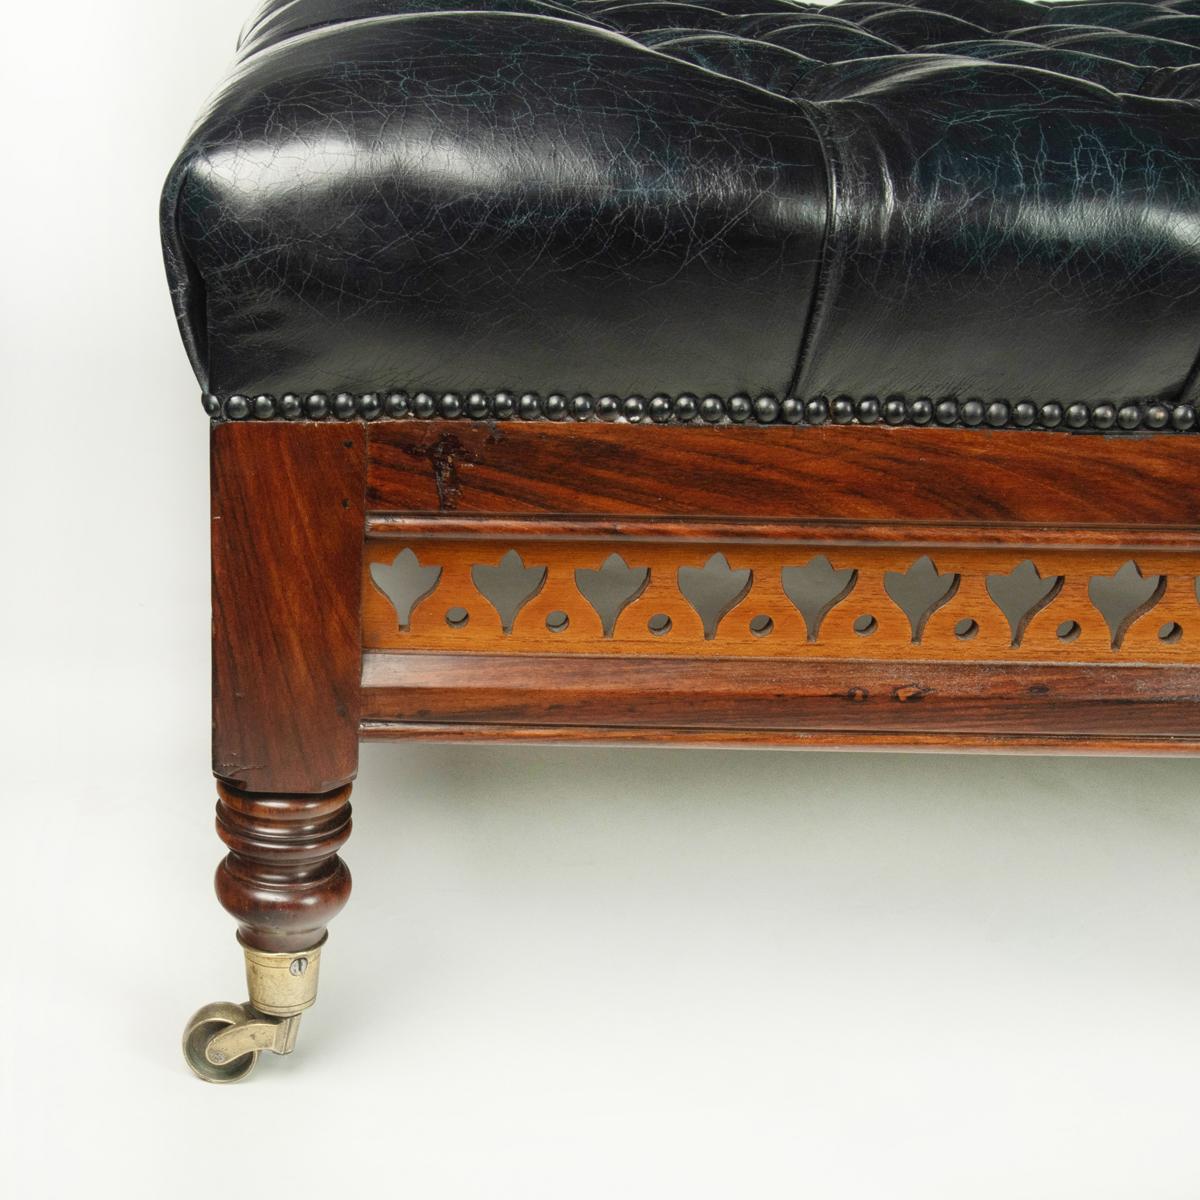 large Victorian leather stool